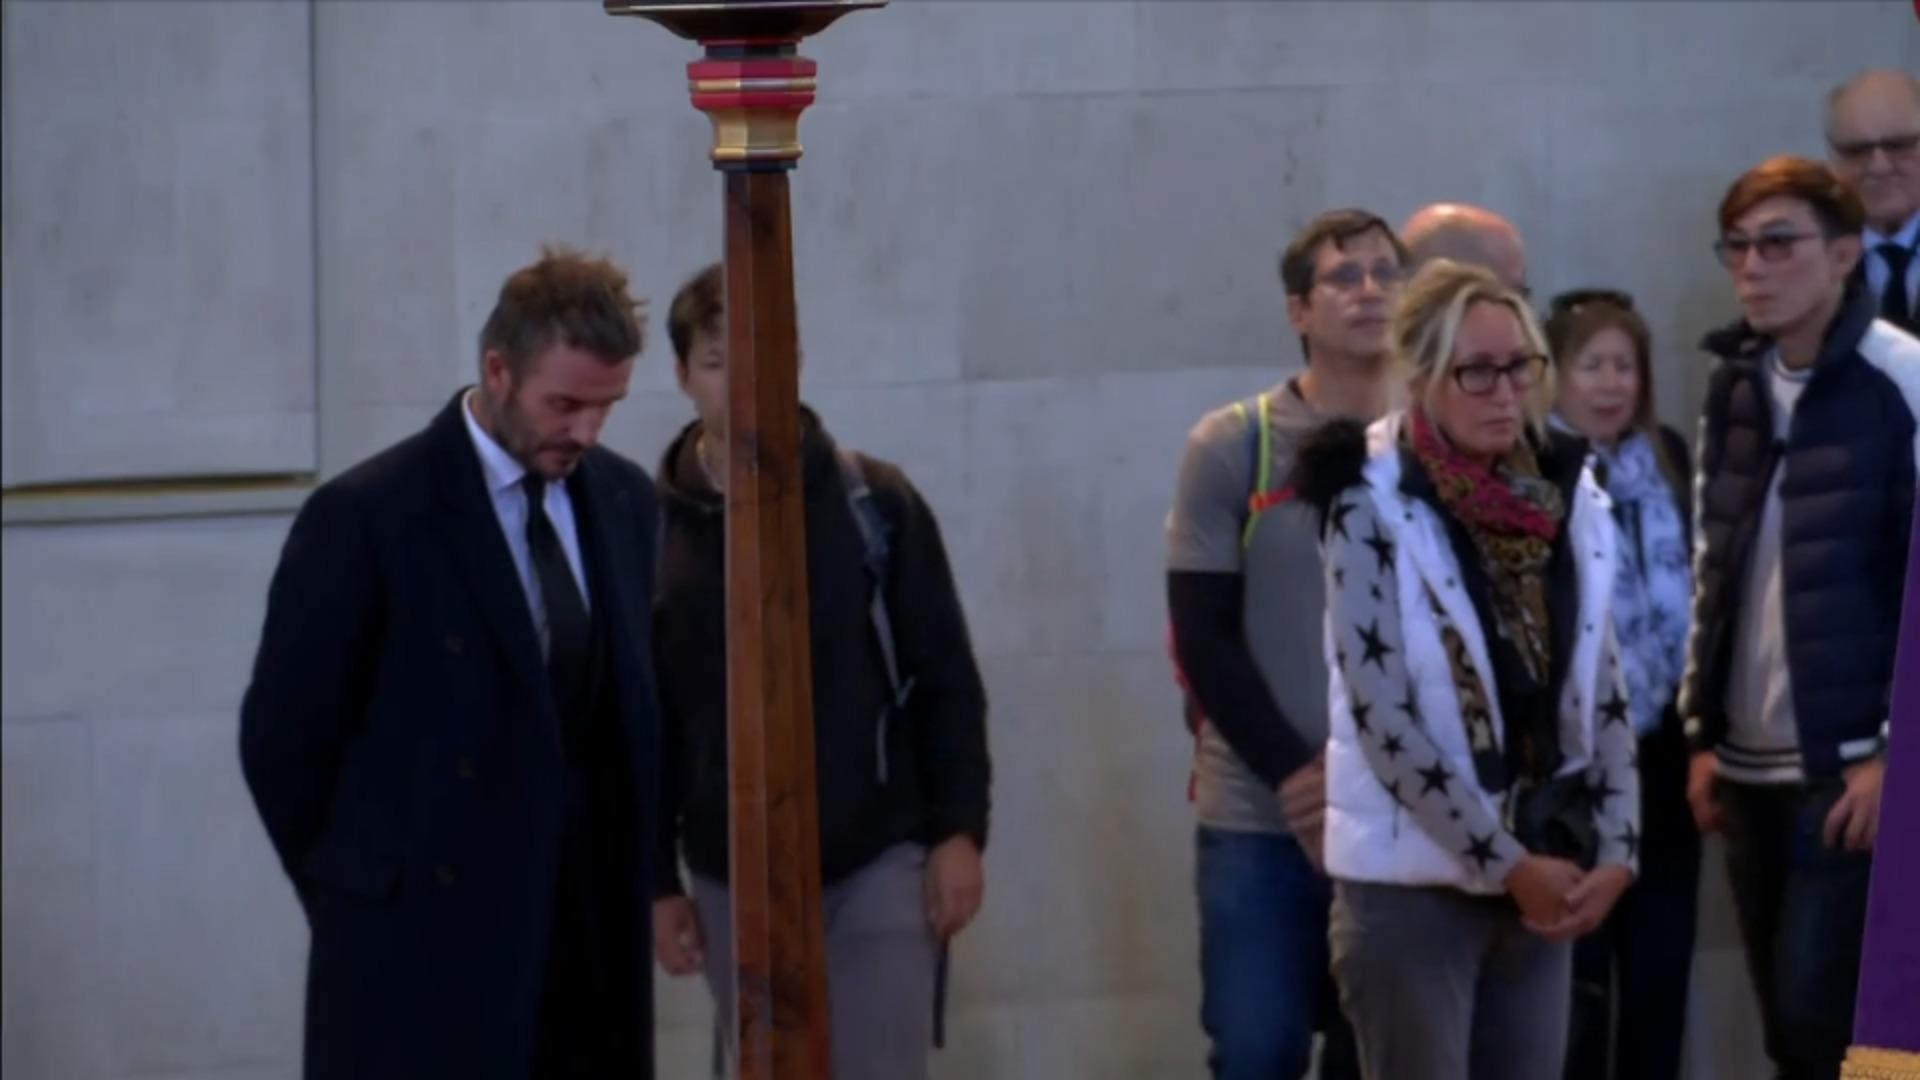 David Beckham bows to Queen's coffin He's been looking at it for 14 hours